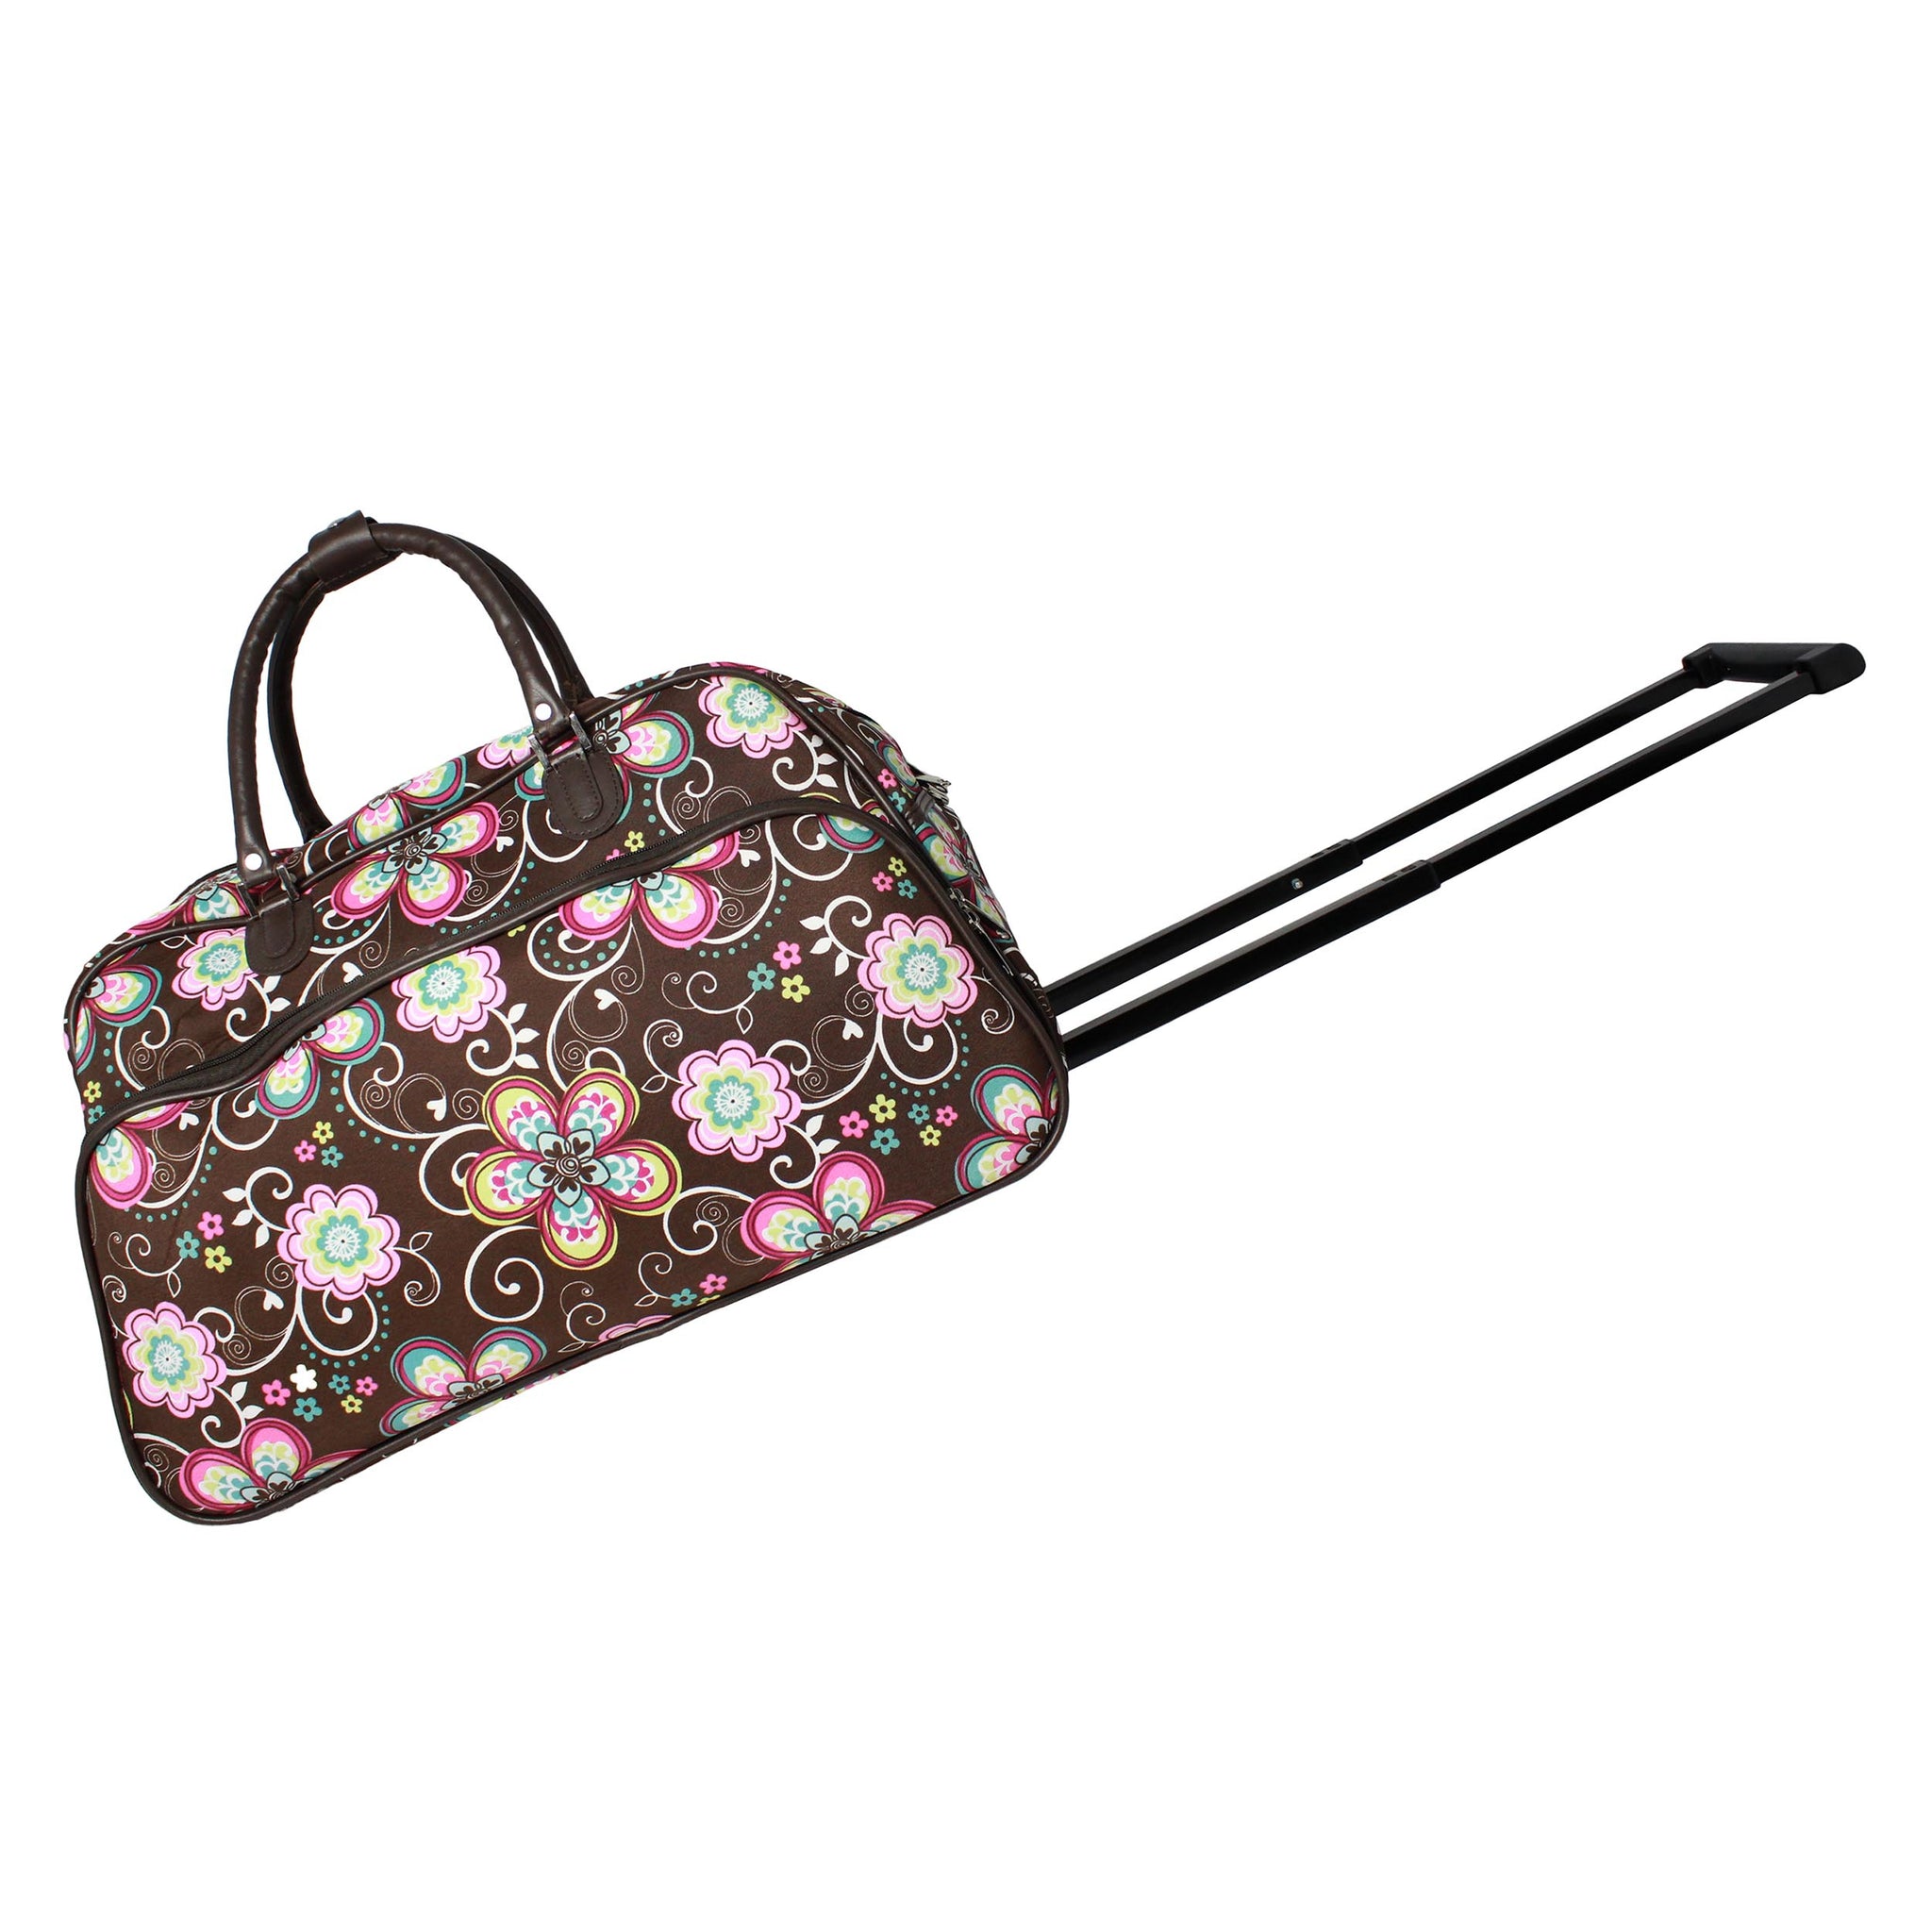 CalBags Floral 21" Rolling Carry-On Duffel Bags